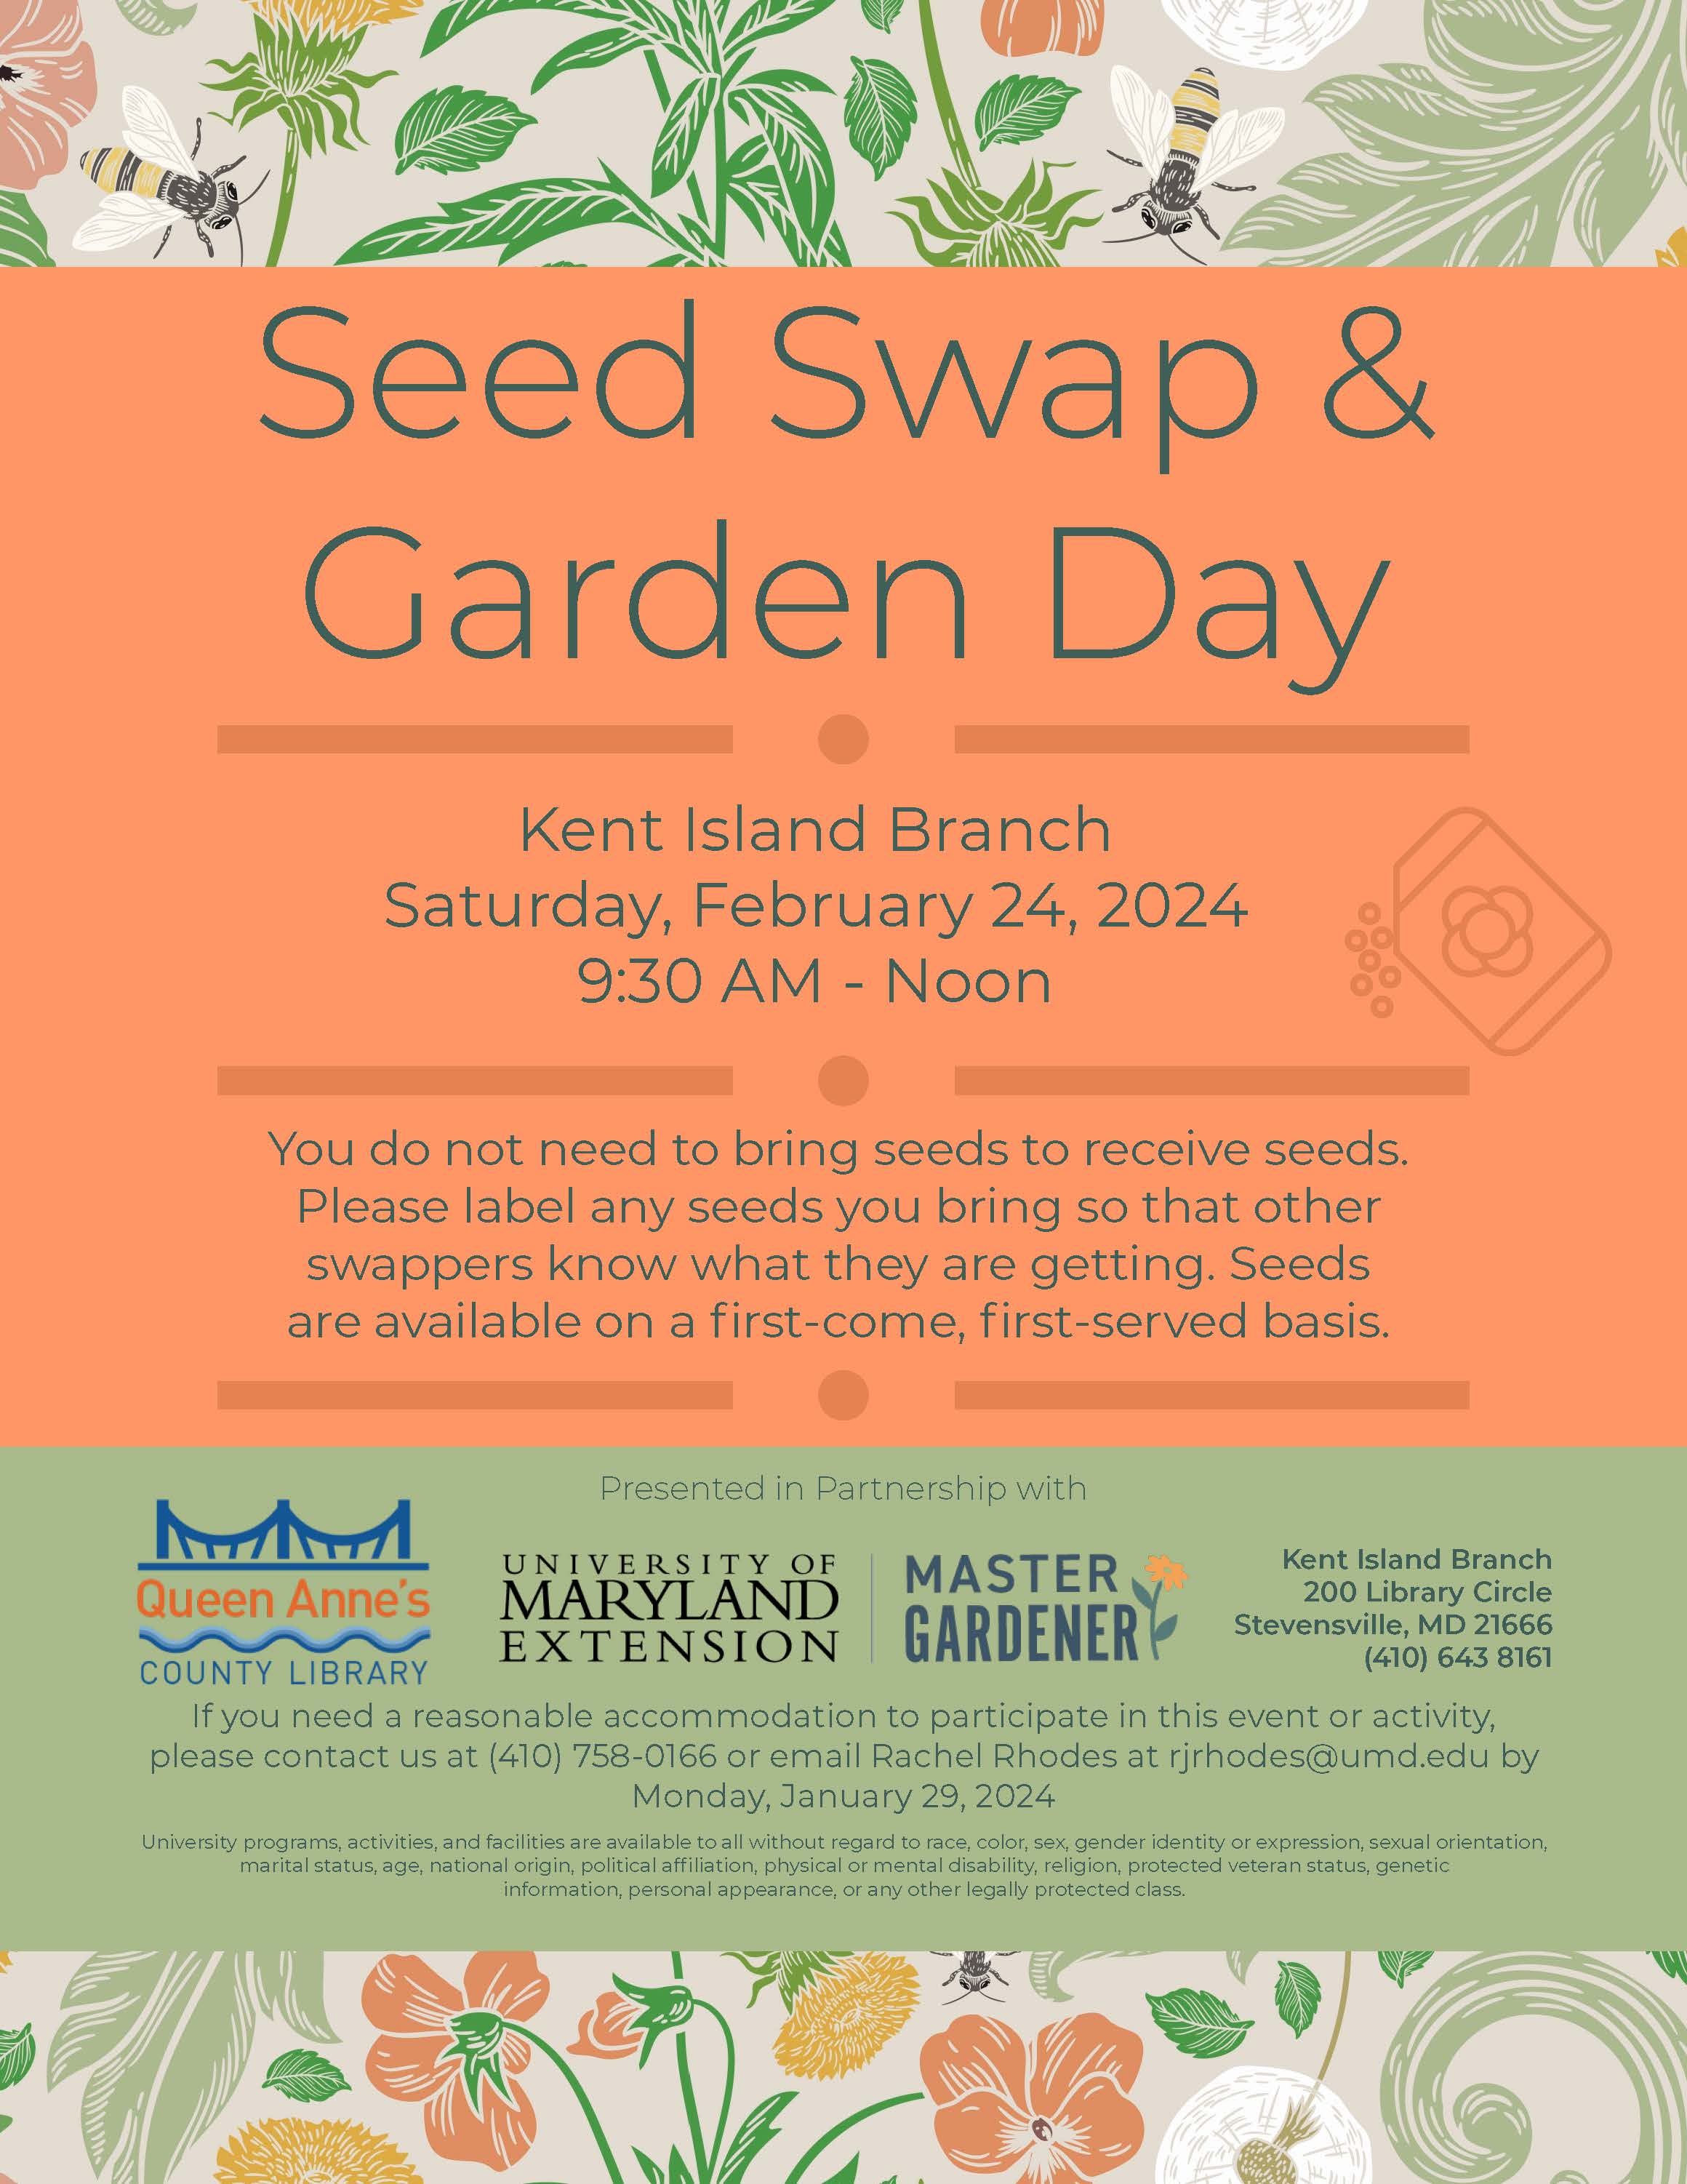 Text heavy flier for Seed Swap & Garden Day